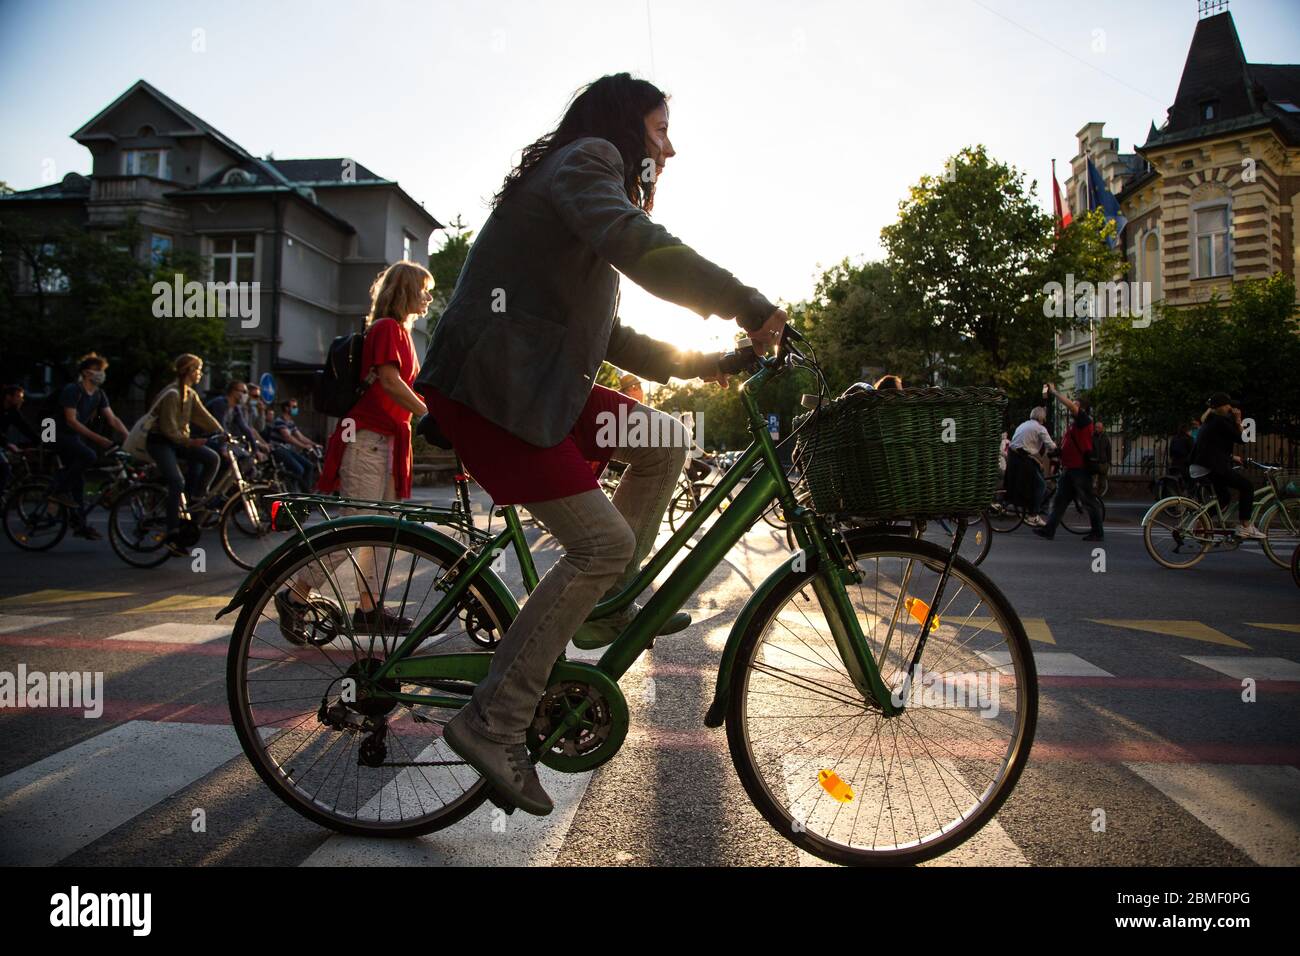 Ljubljana, Slovenia, May 8, 2020: A protester rides her bicycle  during an anti-government protest amid the coronavirus crisis. Following whistleblower's revelations of corruption in the government of Janez Janša and accusations of its undemocratic rule over five thousand people rode bicycles around government buildings in sign of protest. Stock Photo